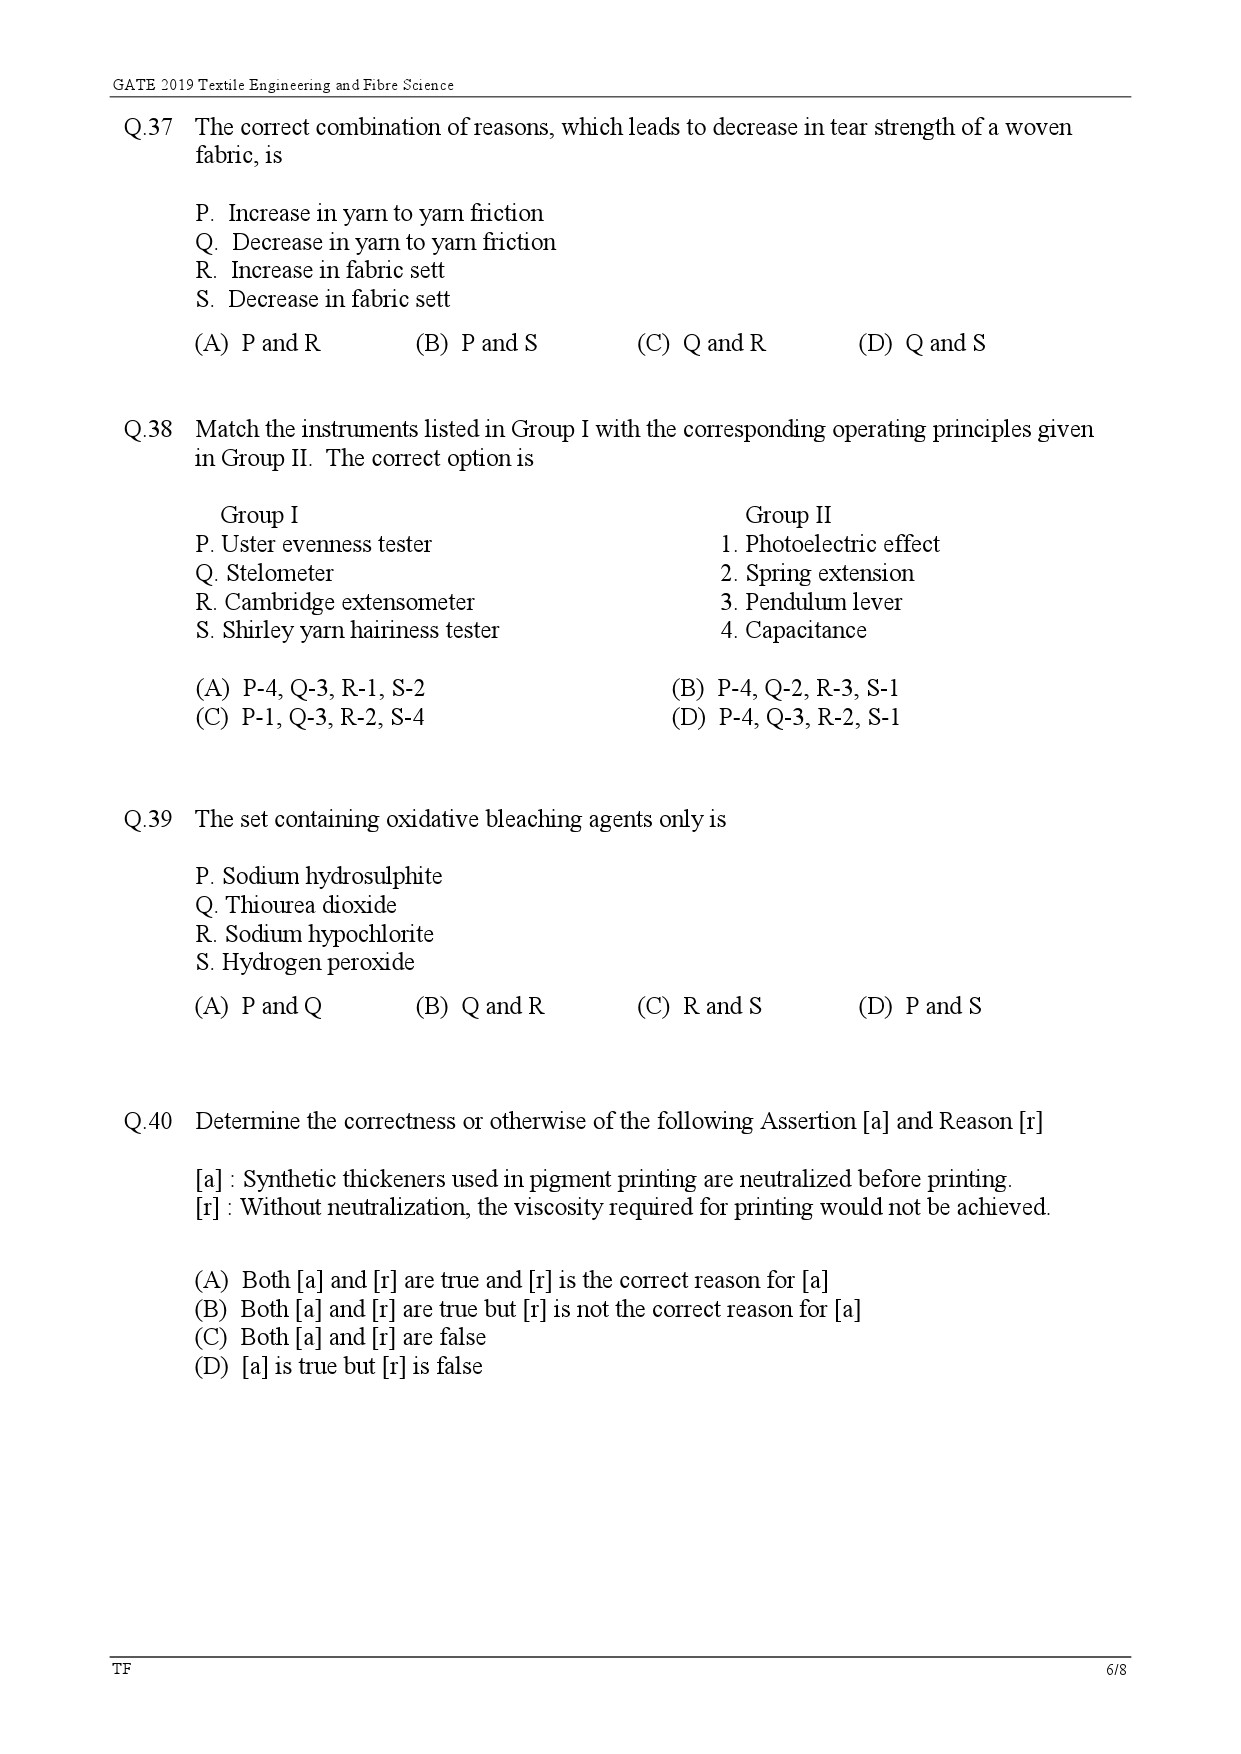 GATE Exam Question Paper 2019 Textile Engineering and Fibre Science 9